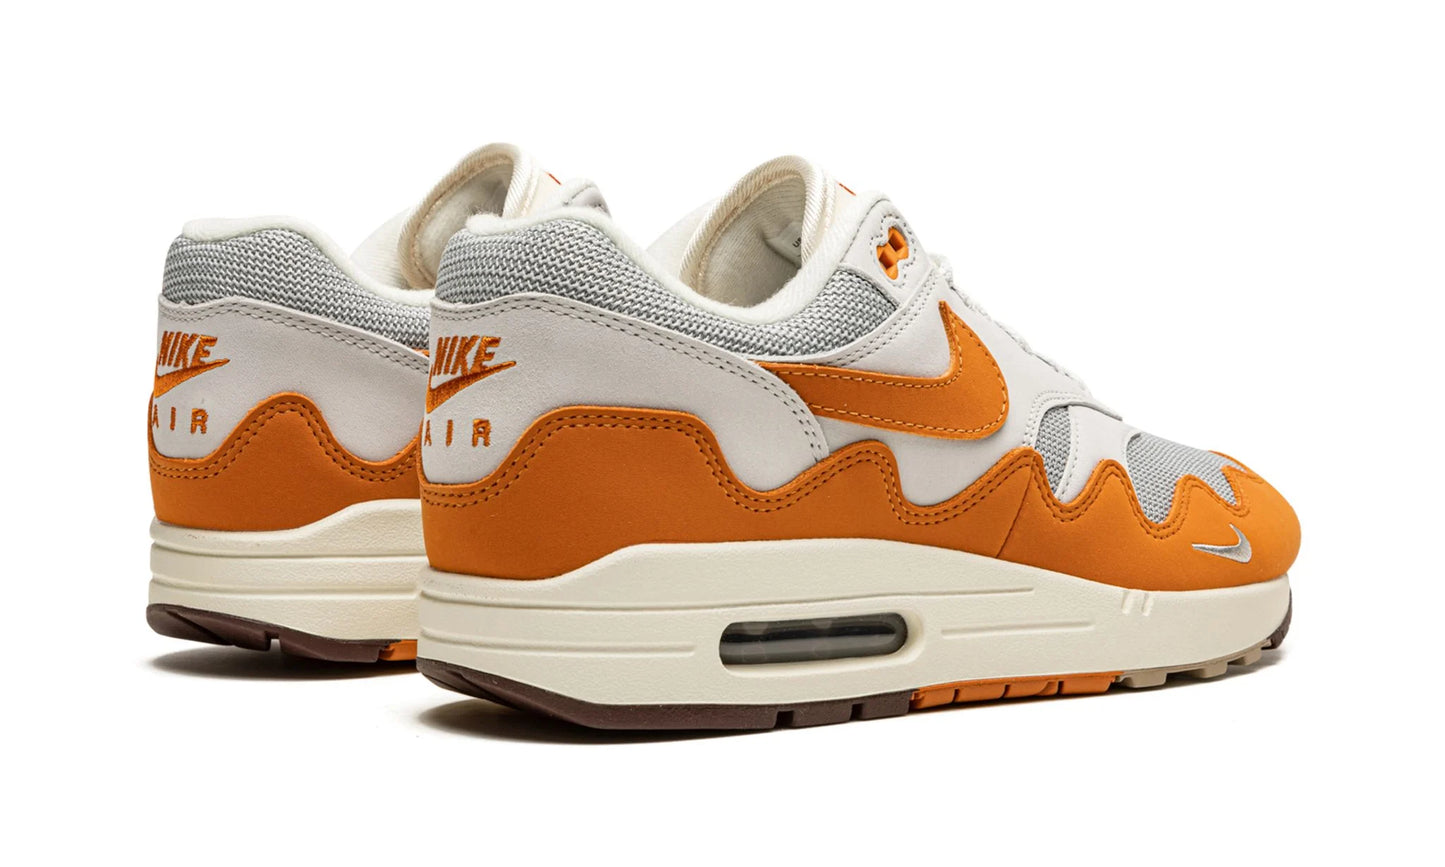 Nike Air Max 1 'Patta Waves - Monarch' (with Bracelet)